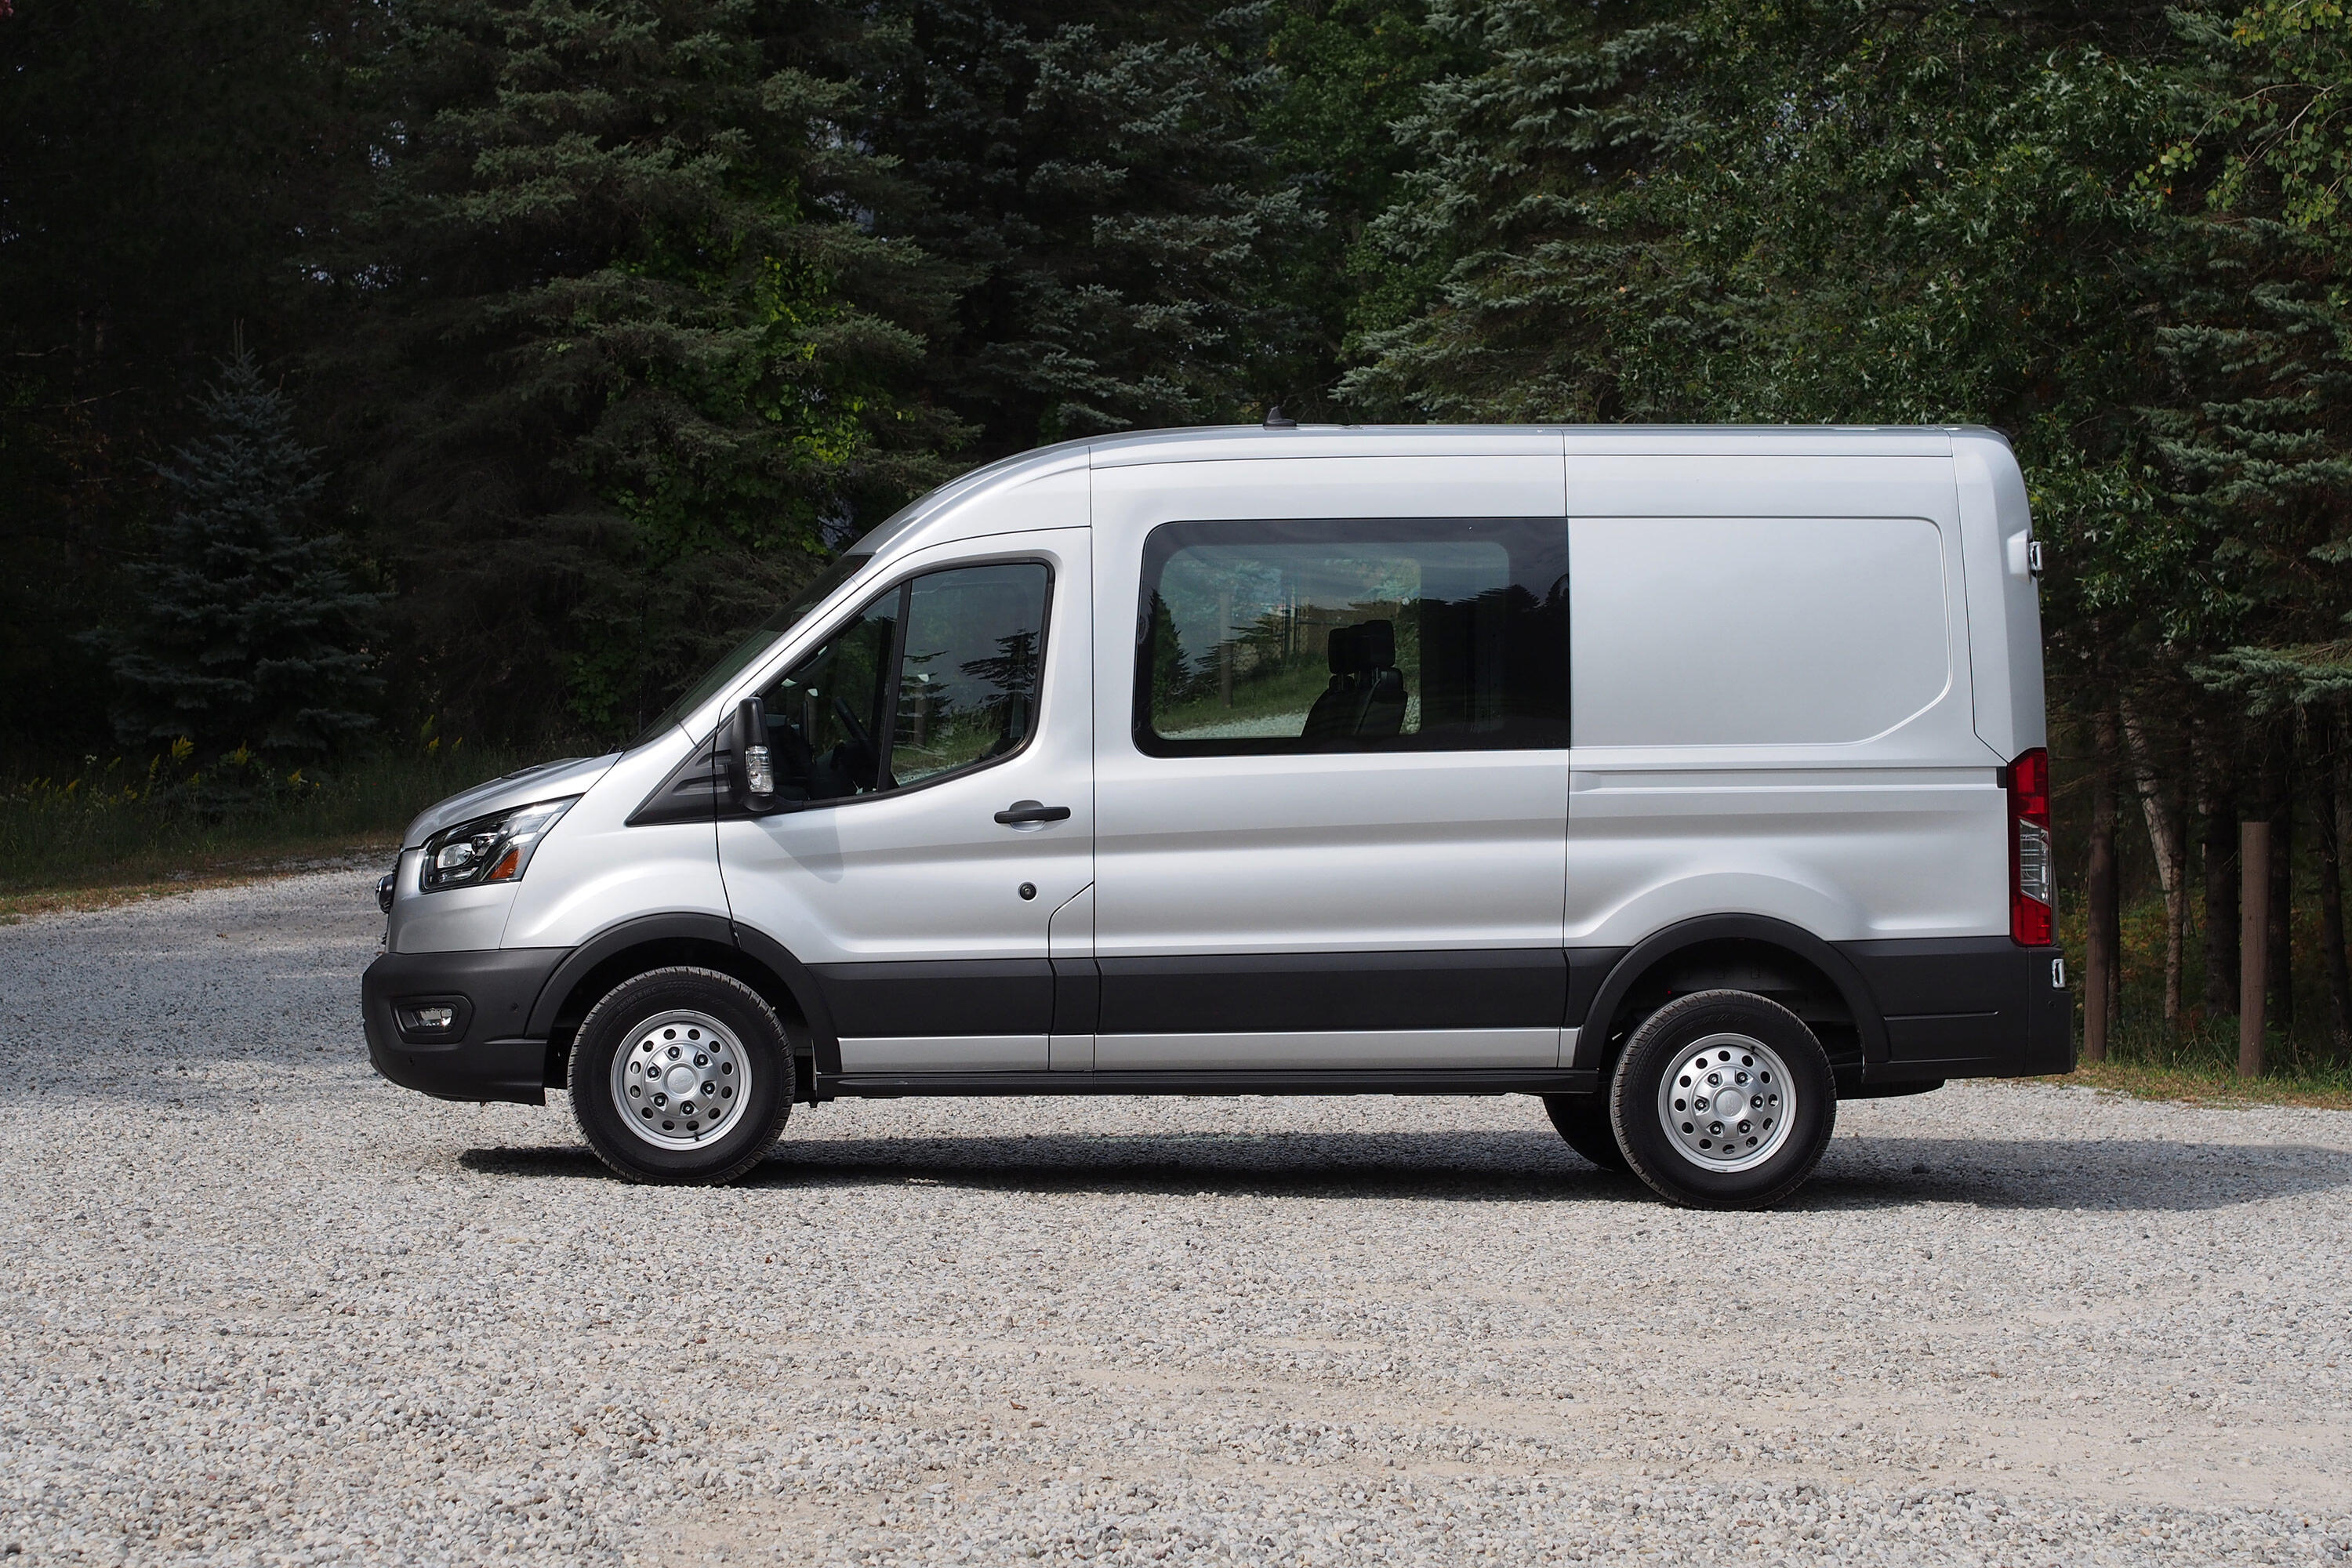 2020 Ford Transit review: A likable 